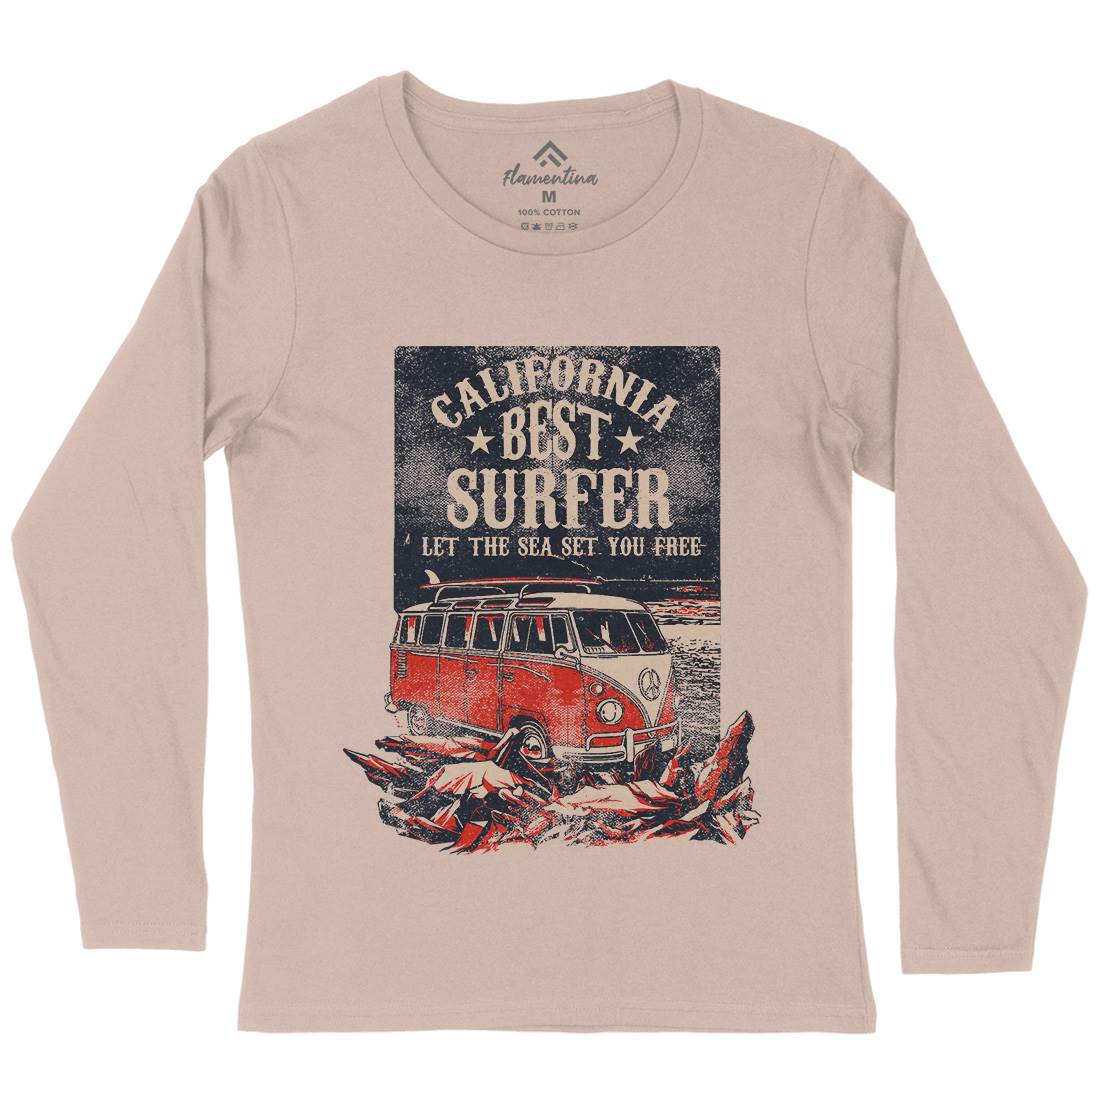 Let The Sea Set You Free Womens Long Sleeve T-Shirt Surf C956